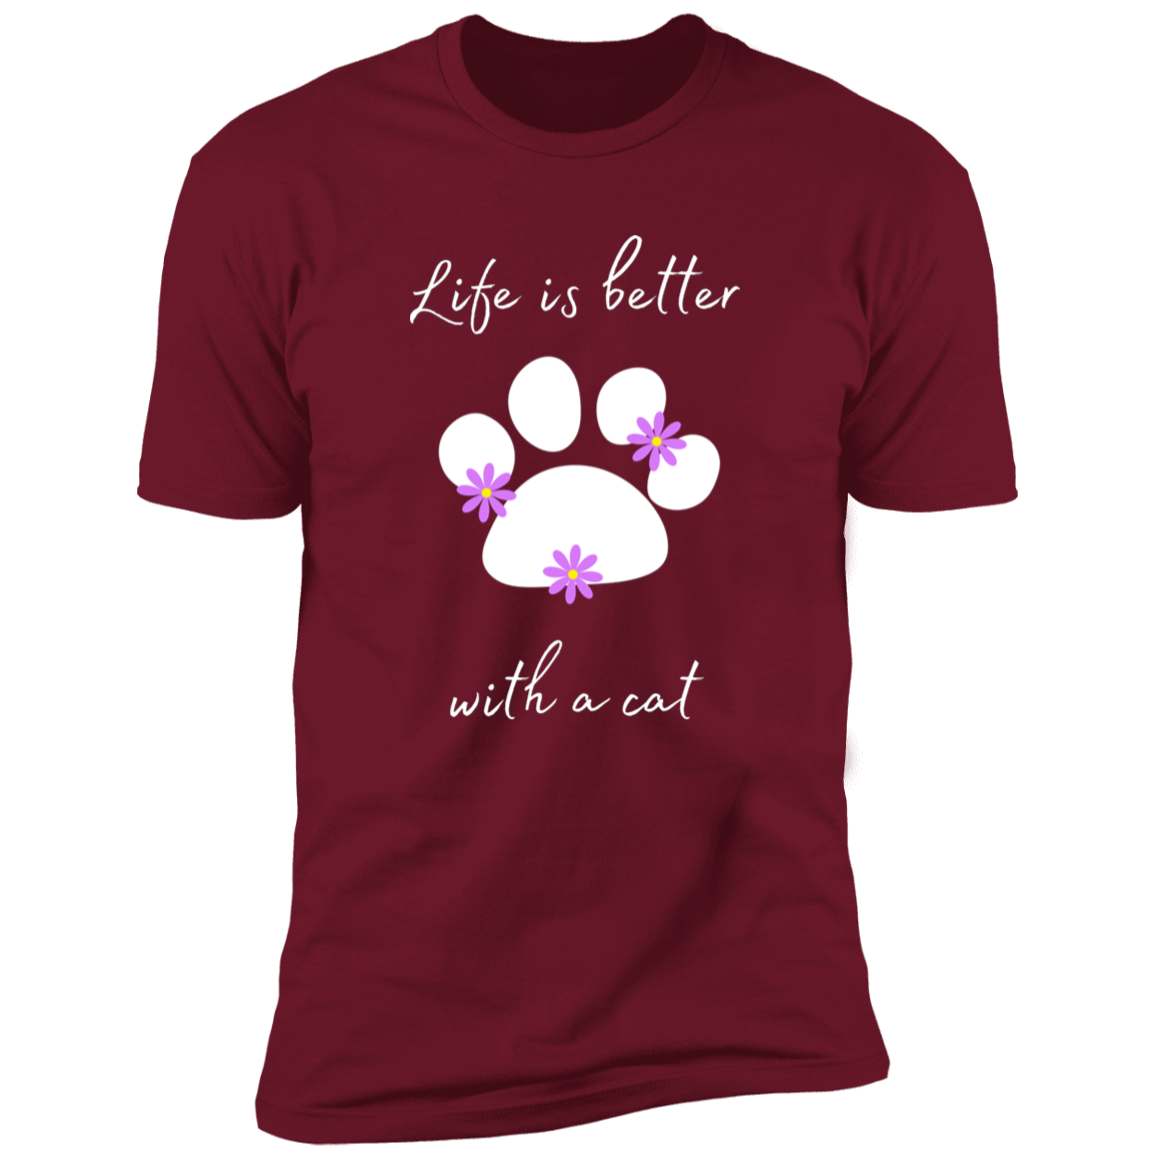 Life is Better with a Cat (Flower) cat t-shirt, cat shirt for humans, cat themed t-shirt, in cardinal red